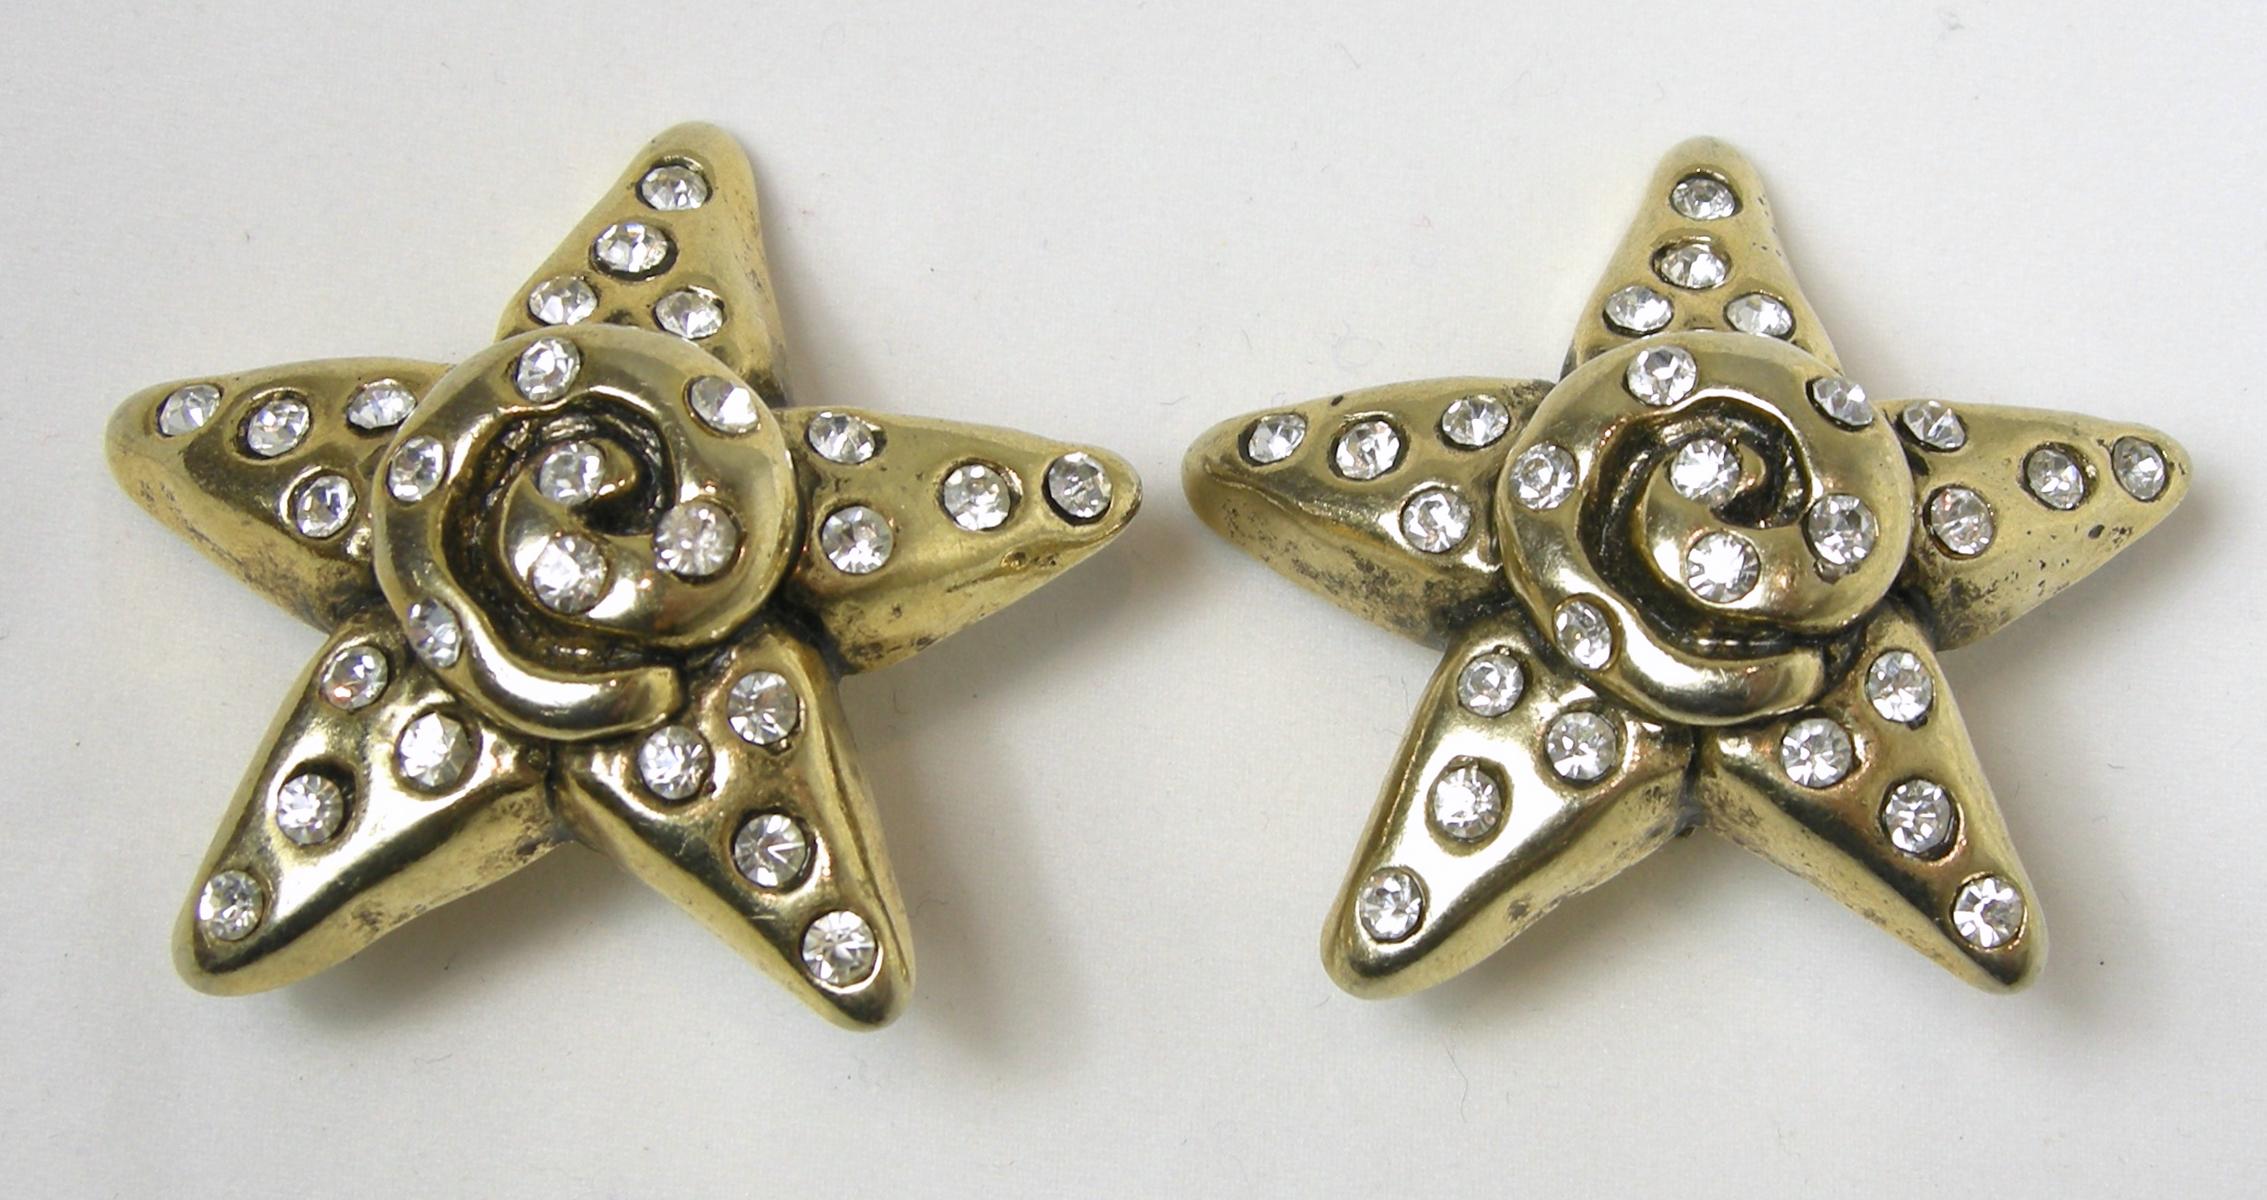 These vintage earrings have a star design with clear crystal accents in a gold tone resin finish.  In excellent condition, these clip earrings measure 2” across.